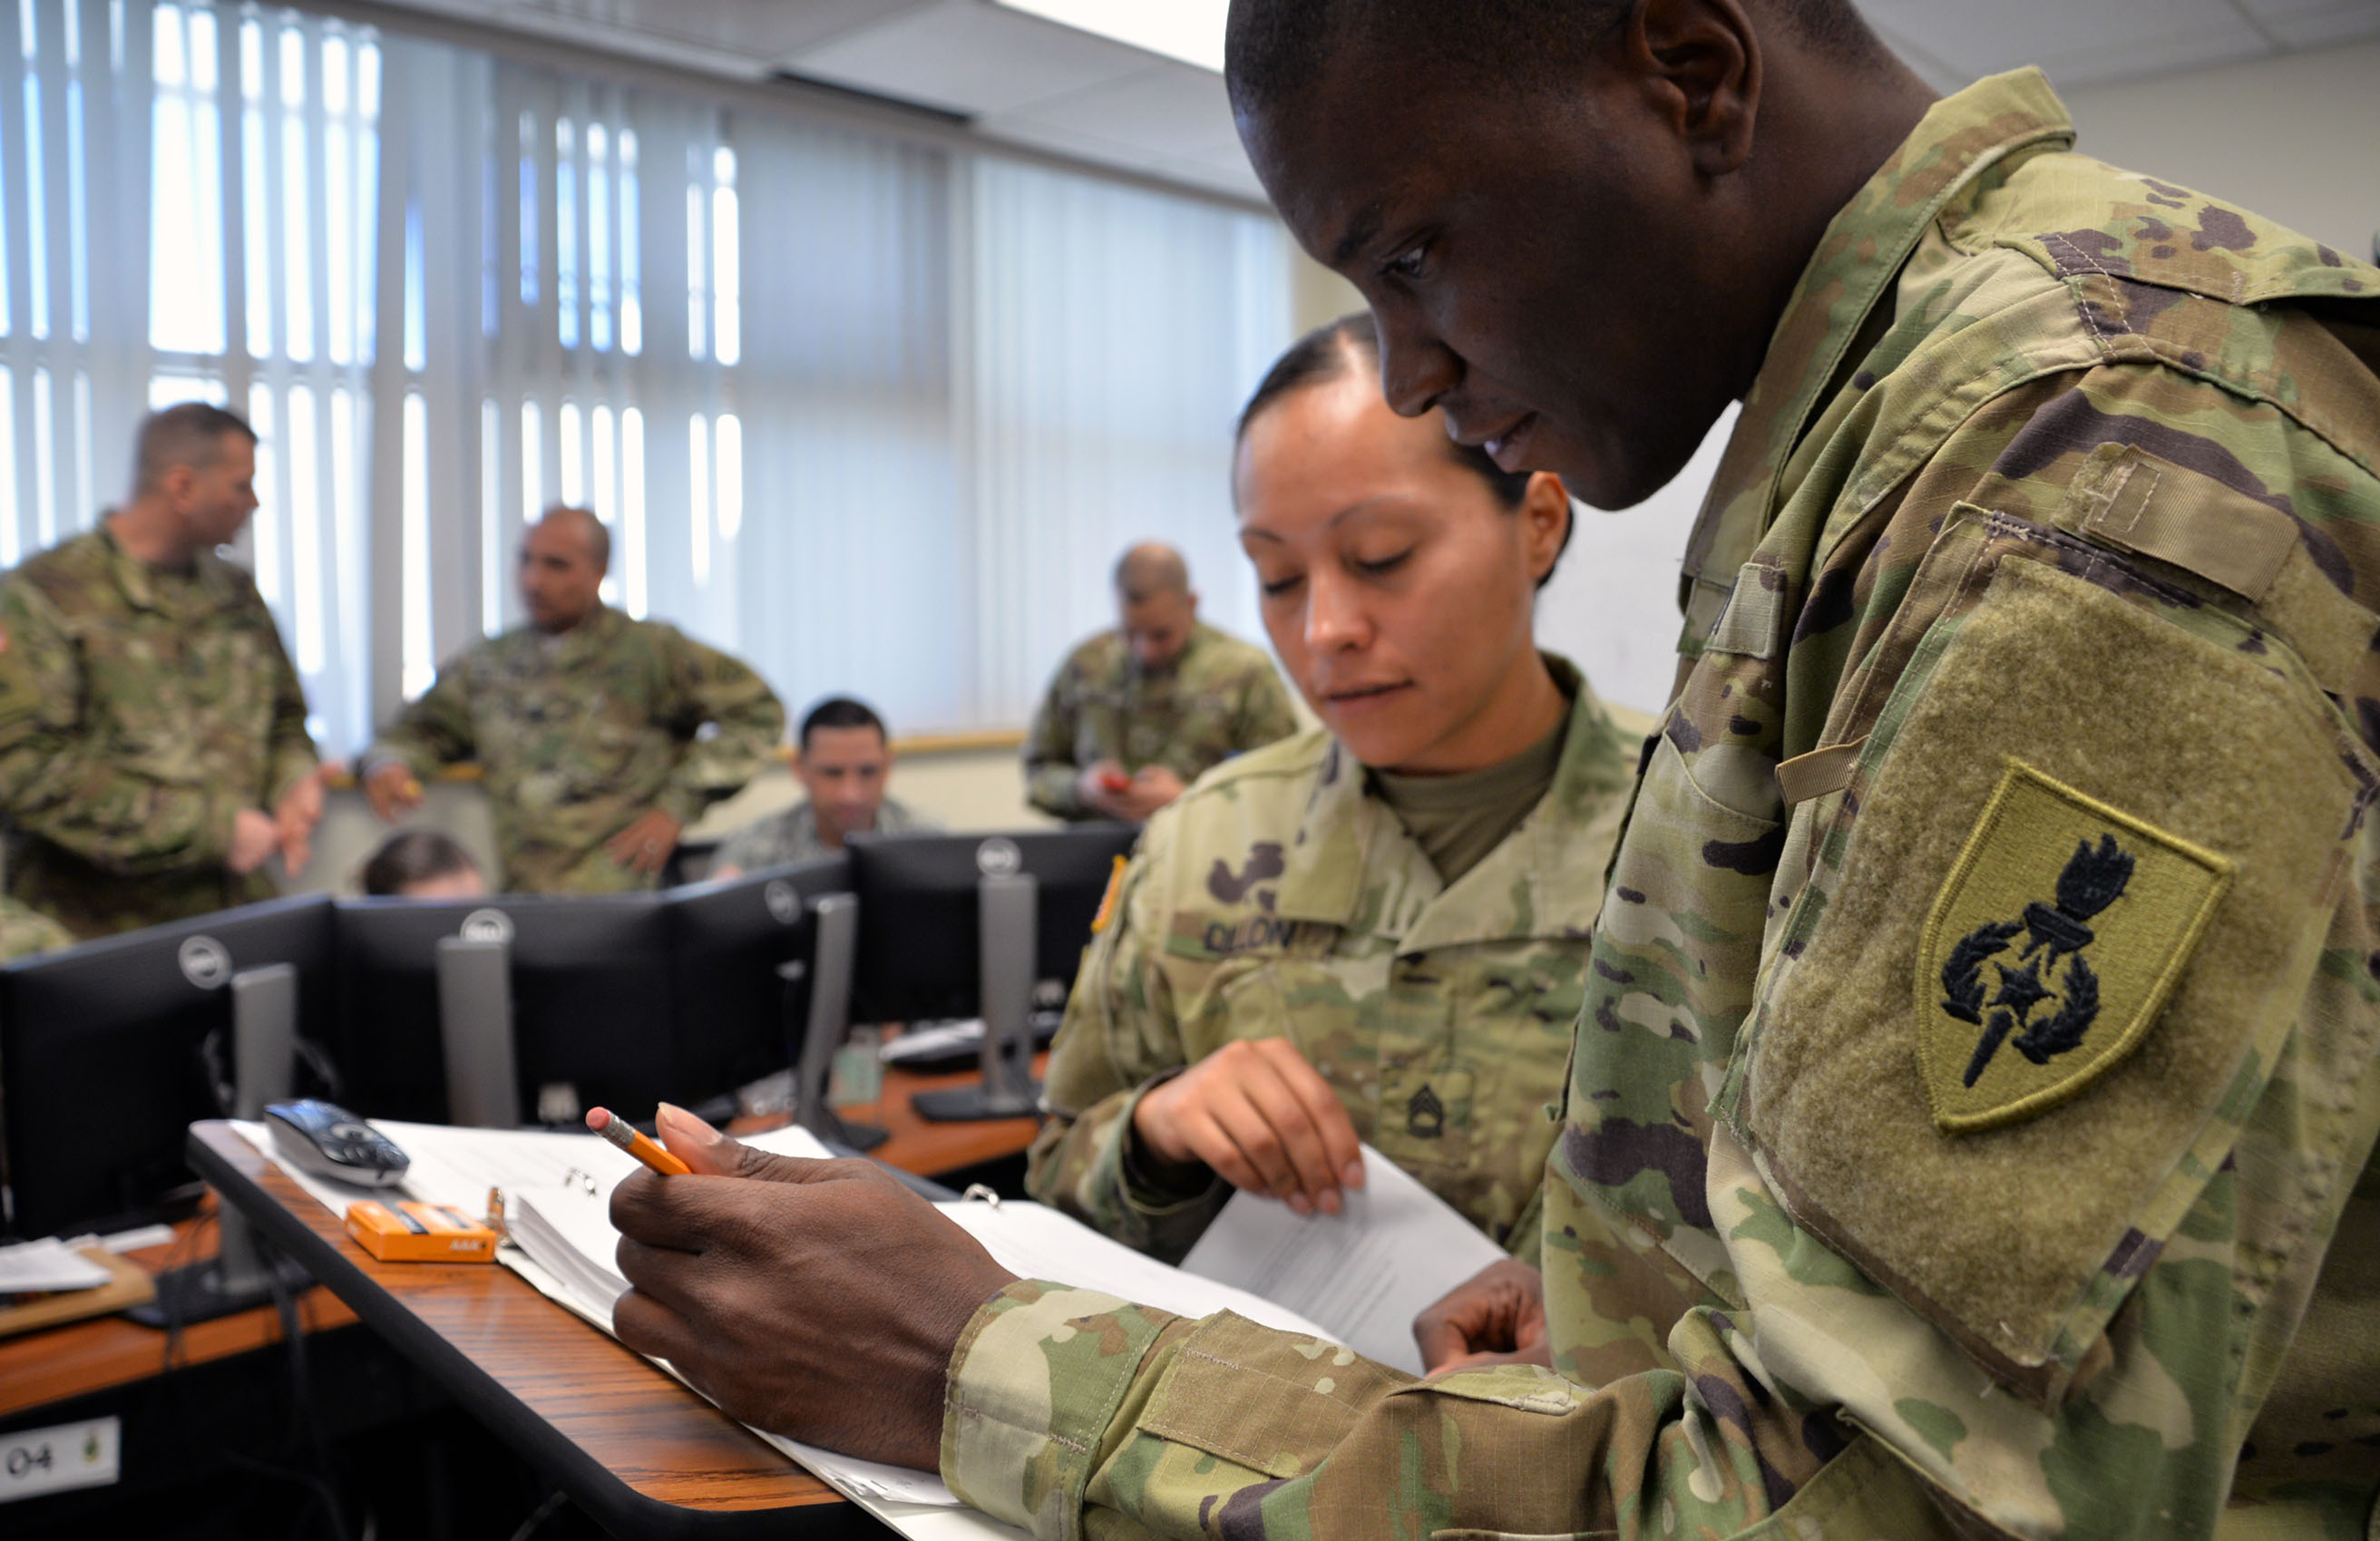 Staff Sgt. Timothy D. Hughes and Sgt. 1st Class Tannia I. Dillon review their notes during a Battle Staff Noncommissioned Officer Course exercise in the spring at the U.S. Army Sergeants Major Academy at Fort Bliss, Texas. (Photo by Martha C. Koester / NCO Journal)